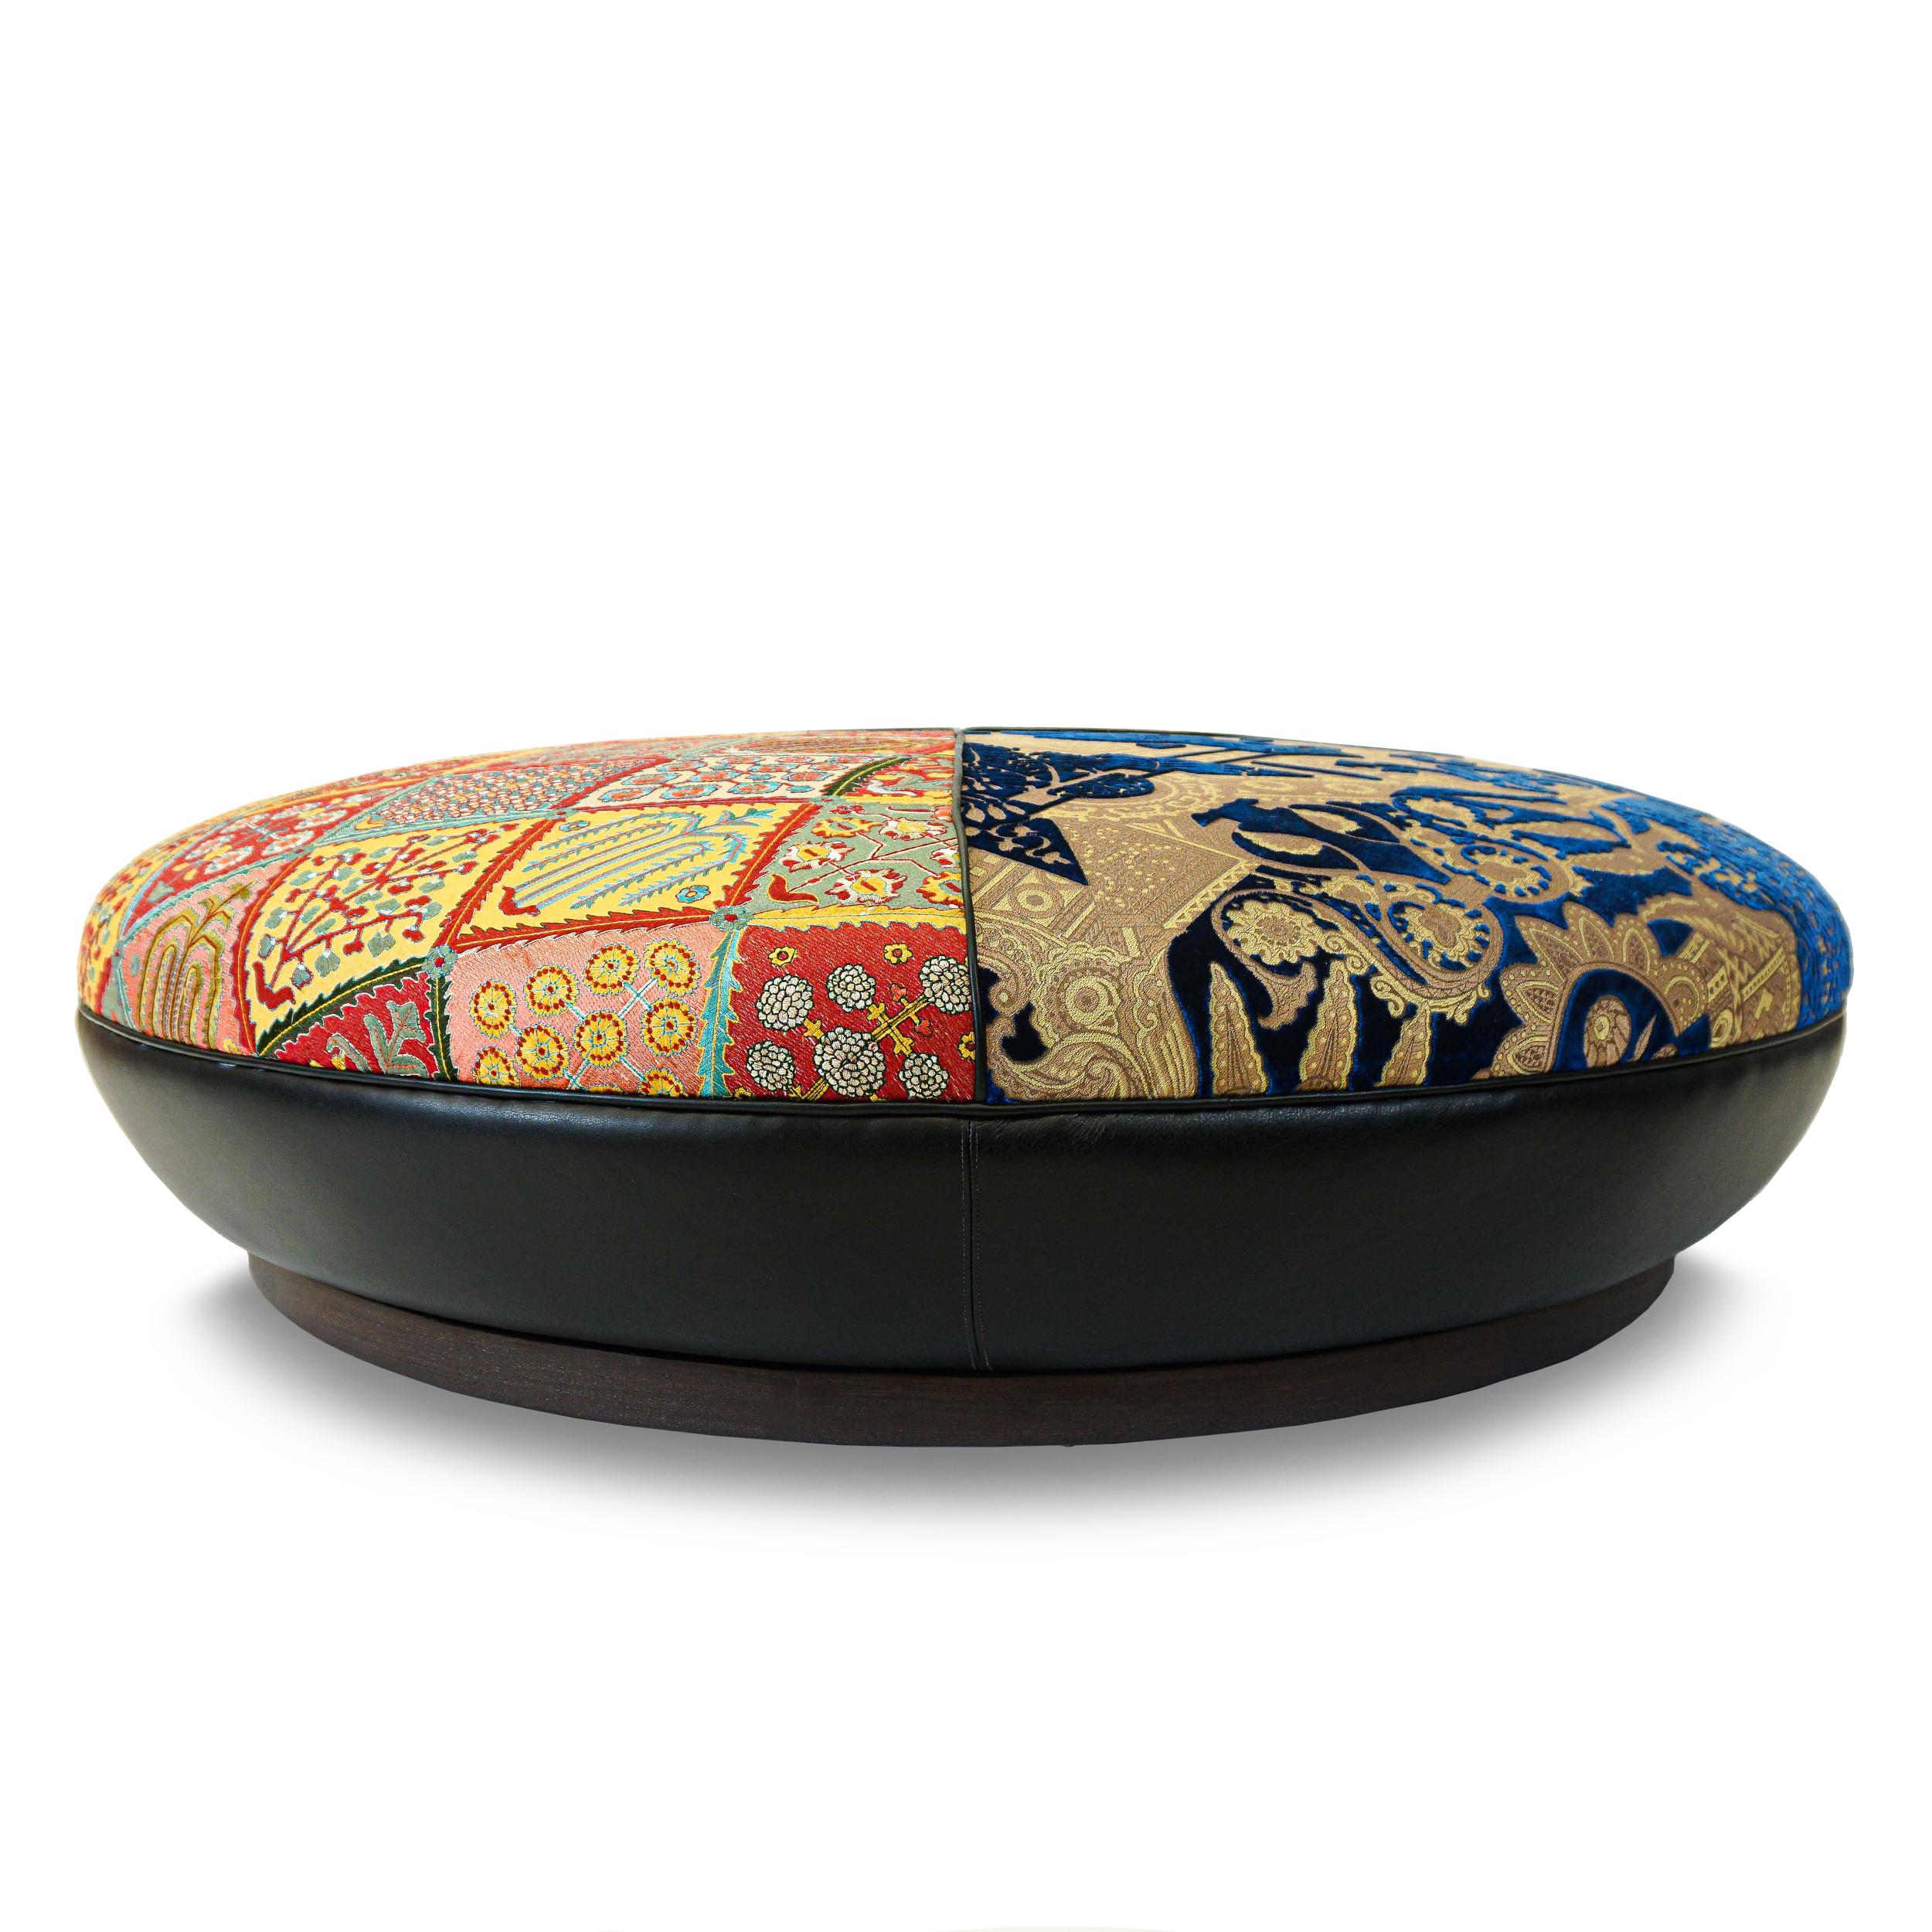 About this piece
Sprawling low round ottoman upholstered in an eclectic mix of three fabrics featuring embroidery, cut velvet, and jacquard and with a vinyl plinth base with a stained wood platform. Seat is firm and crowned but can support a tray.